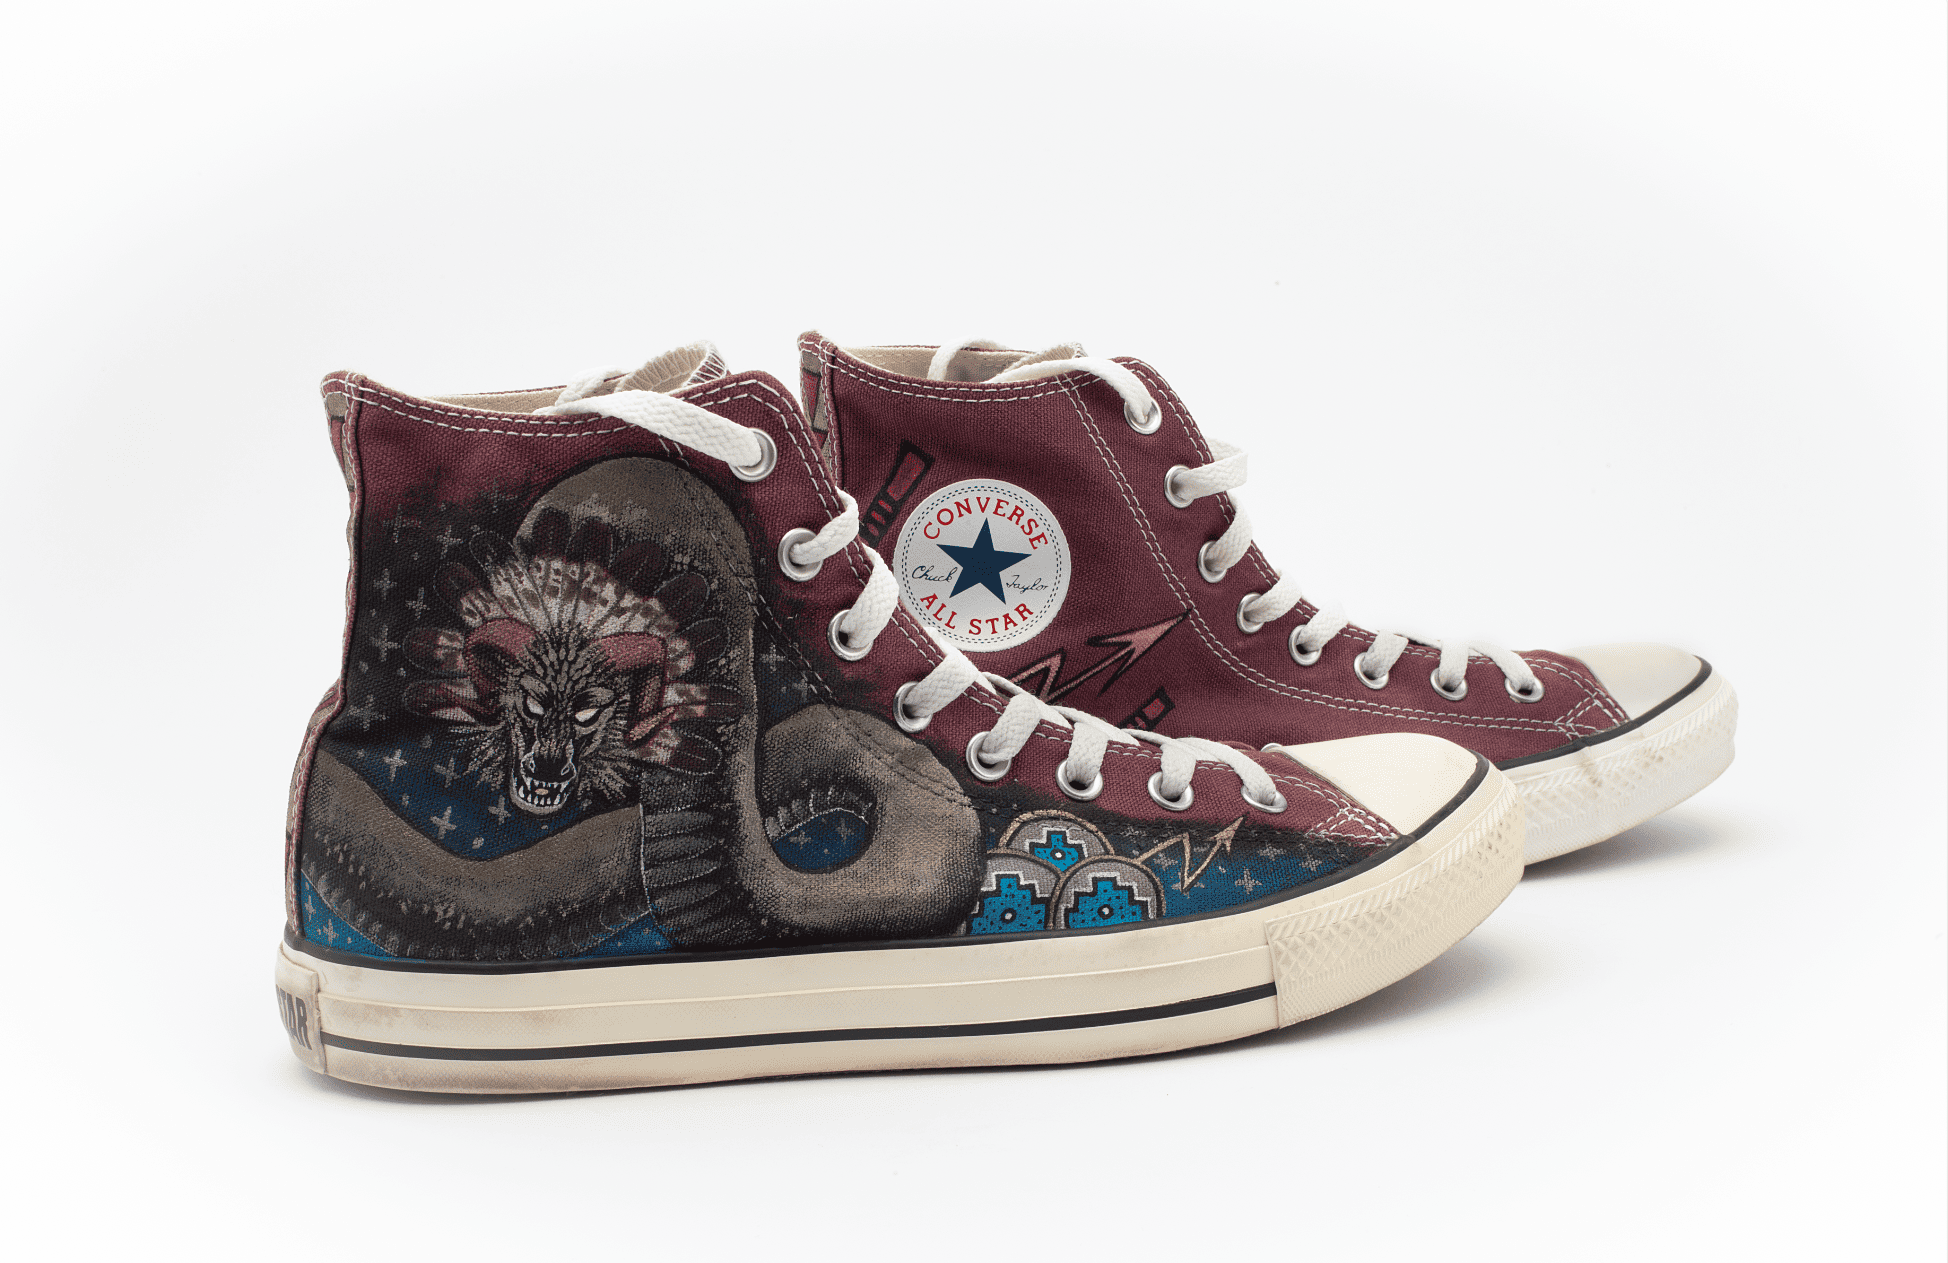 Chuck taylor all star high top sneakers.